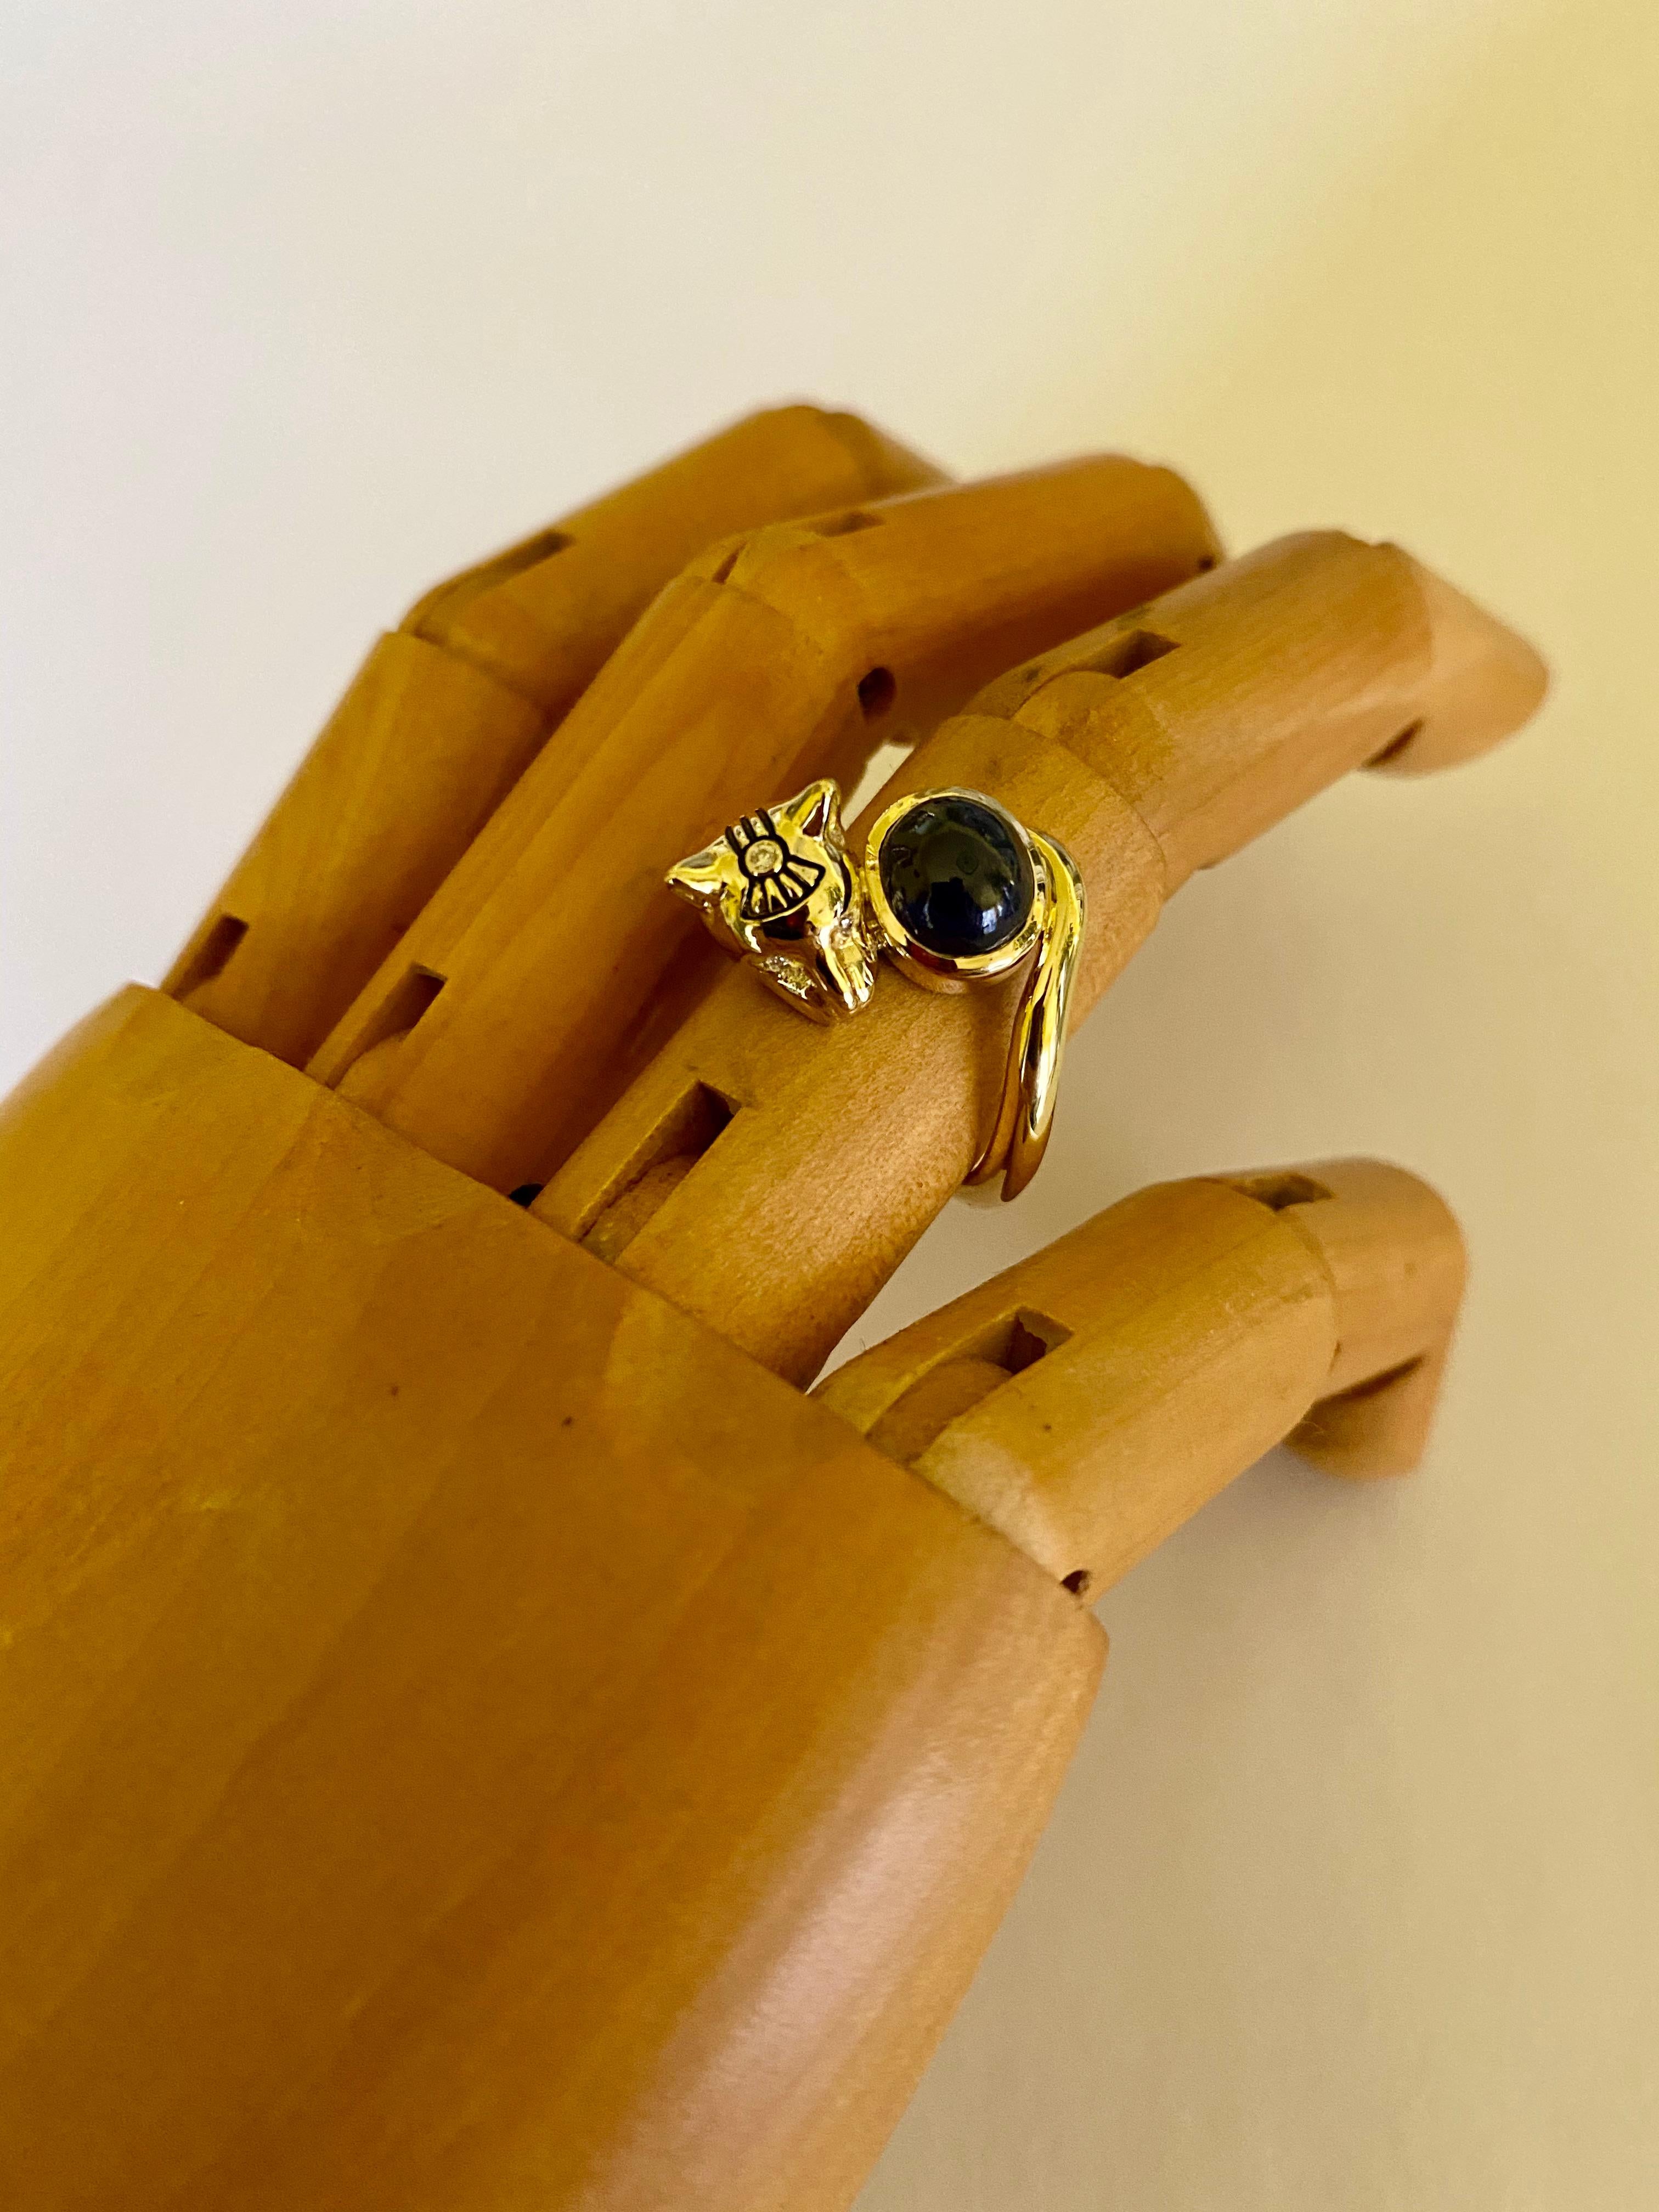 Cabochon blue sapphire and diamonds lend prominence to this Egyptian Revival cat ring.  Bastet, also known a Bast, is a fierce Egyptian goddess worshiped in the form of a lion and later, after is domestication, a cat.  This 18k gold wearable